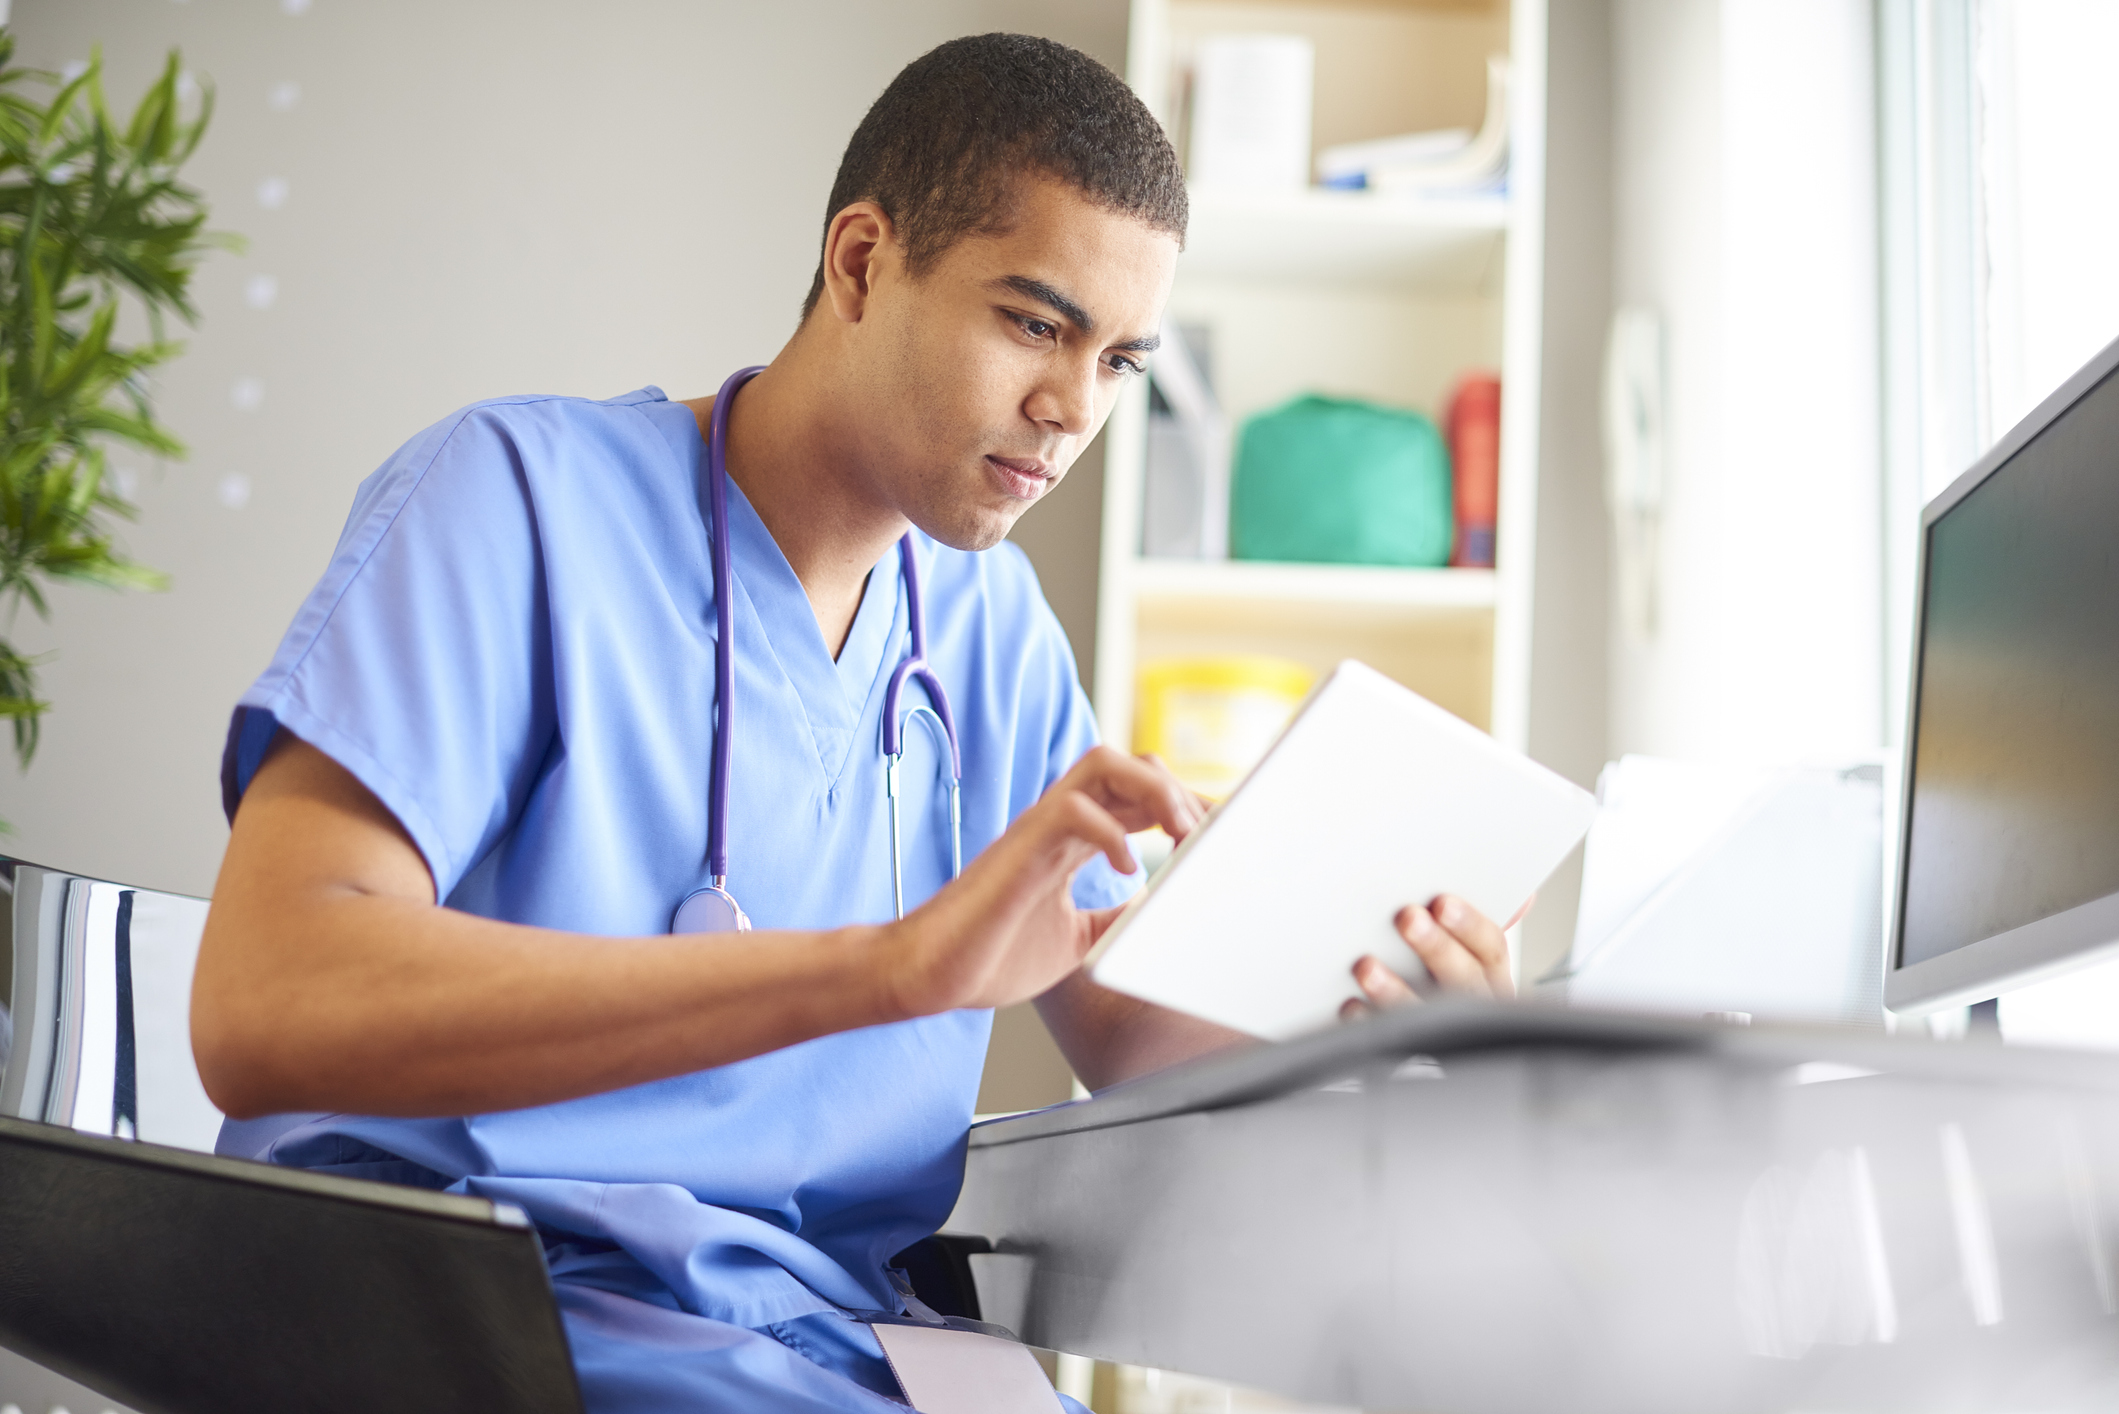 male gp sits at his desk looking at his digital tablet reading through patient notes, emails and looking through patients x-ray's. He is wearing blue scrubs and has his stethoscope around his neck.